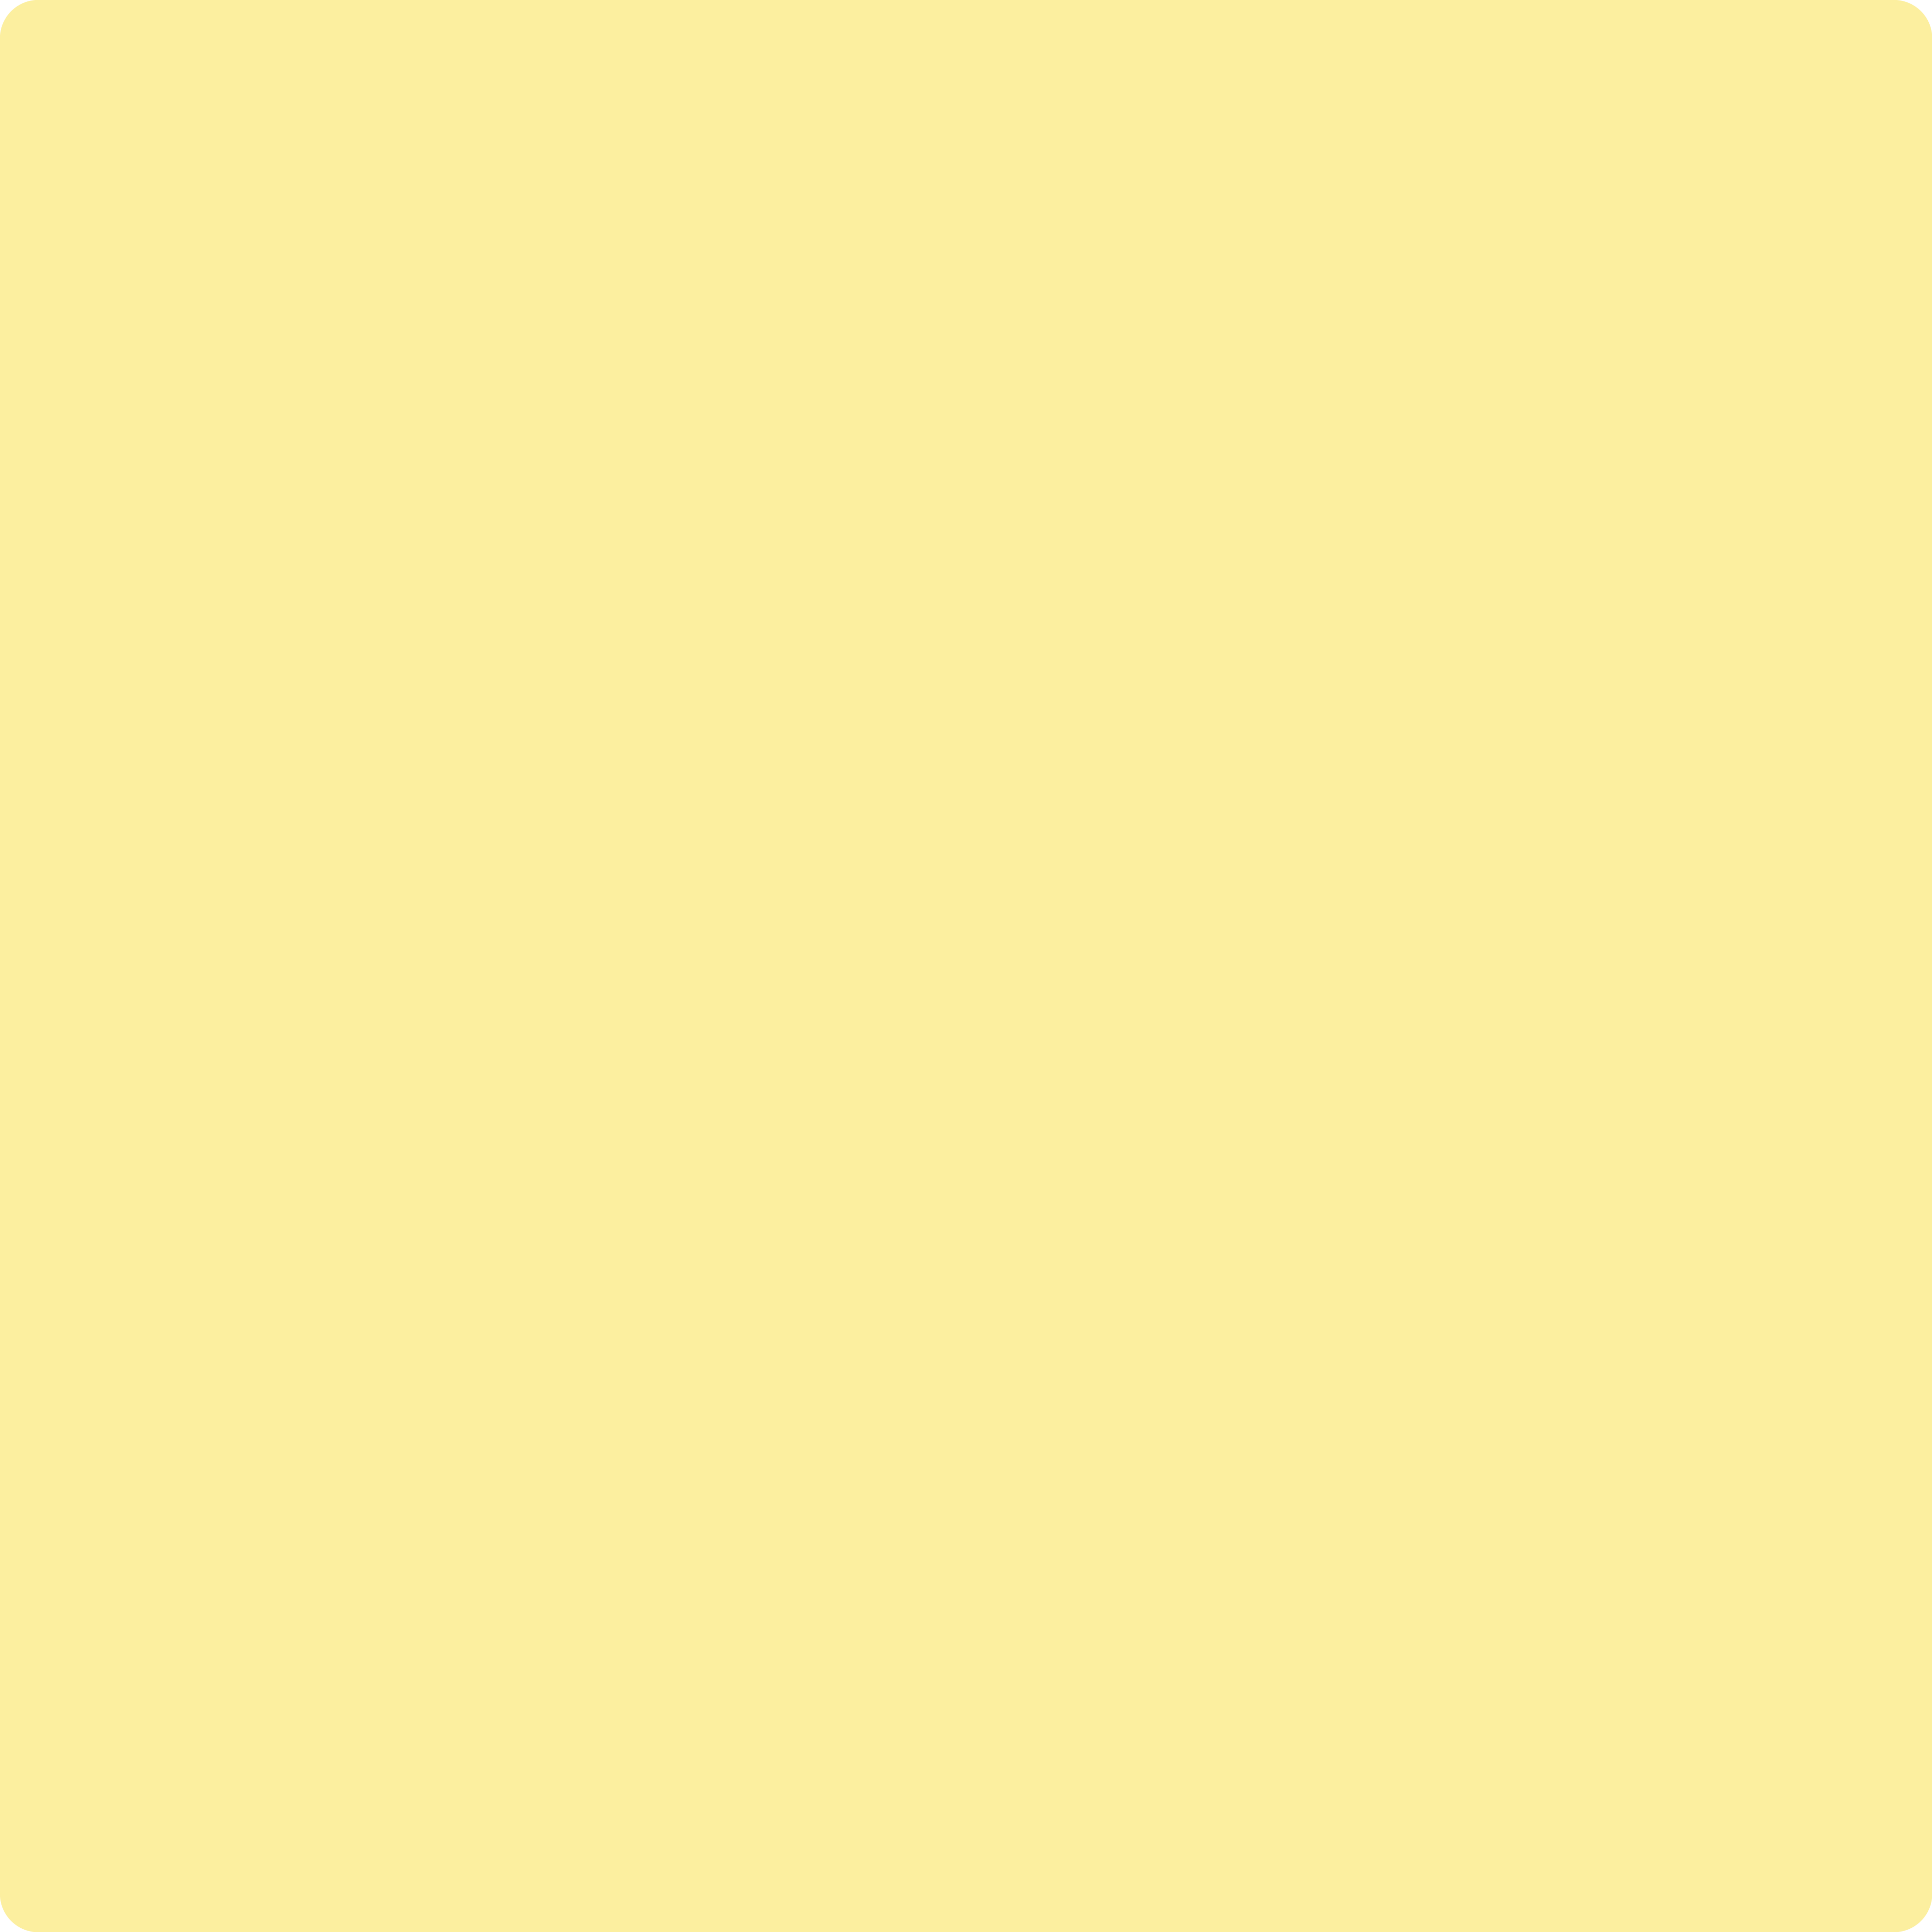 A yellow square with black lines - Pastel yellow